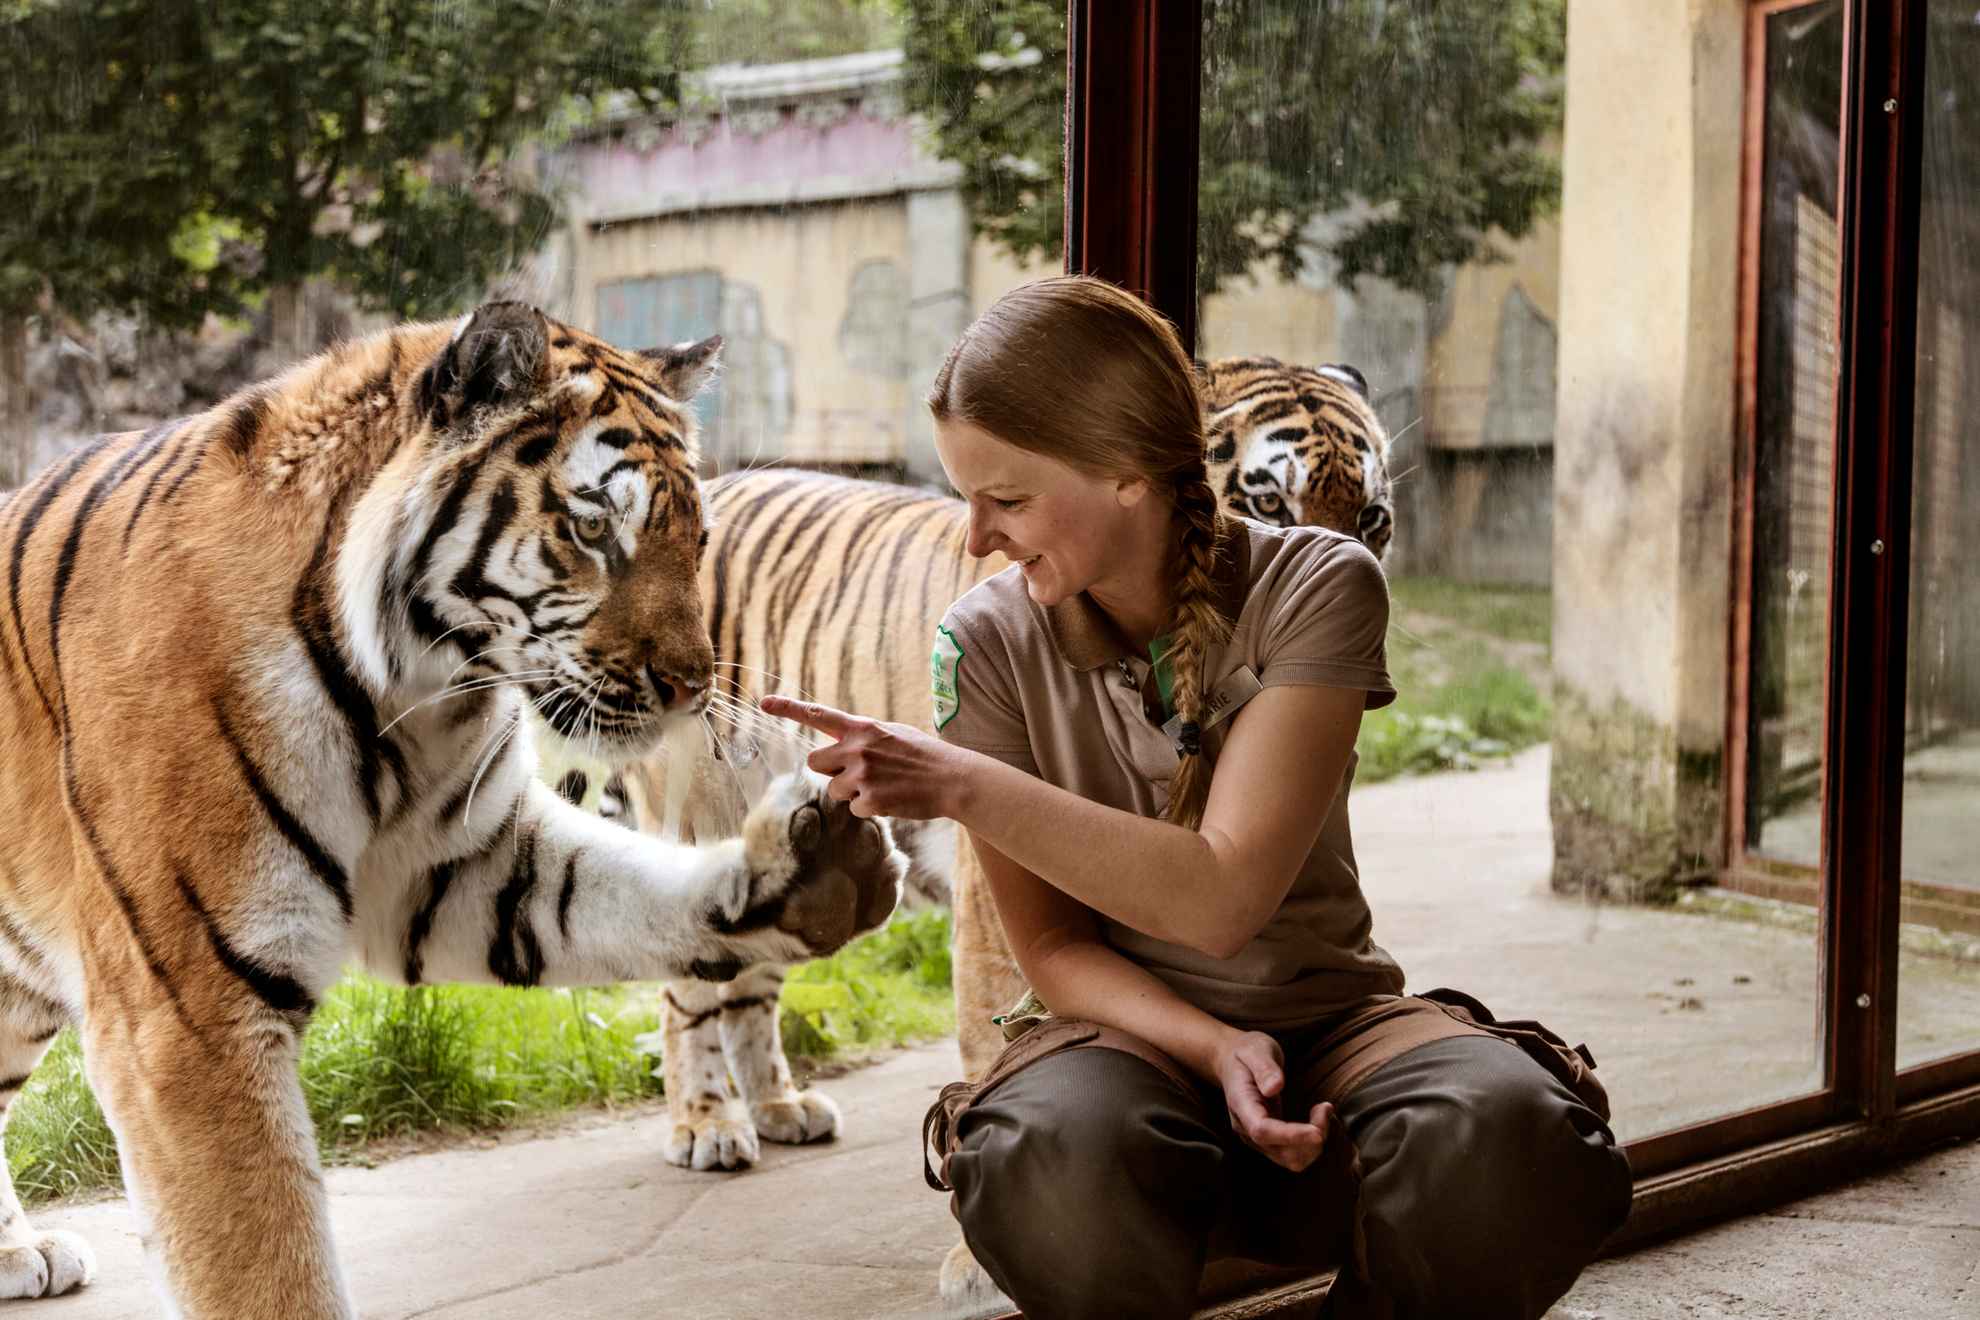 Woman sitting outside the tiger enclosure while a tiger puts its paw up on the glass window